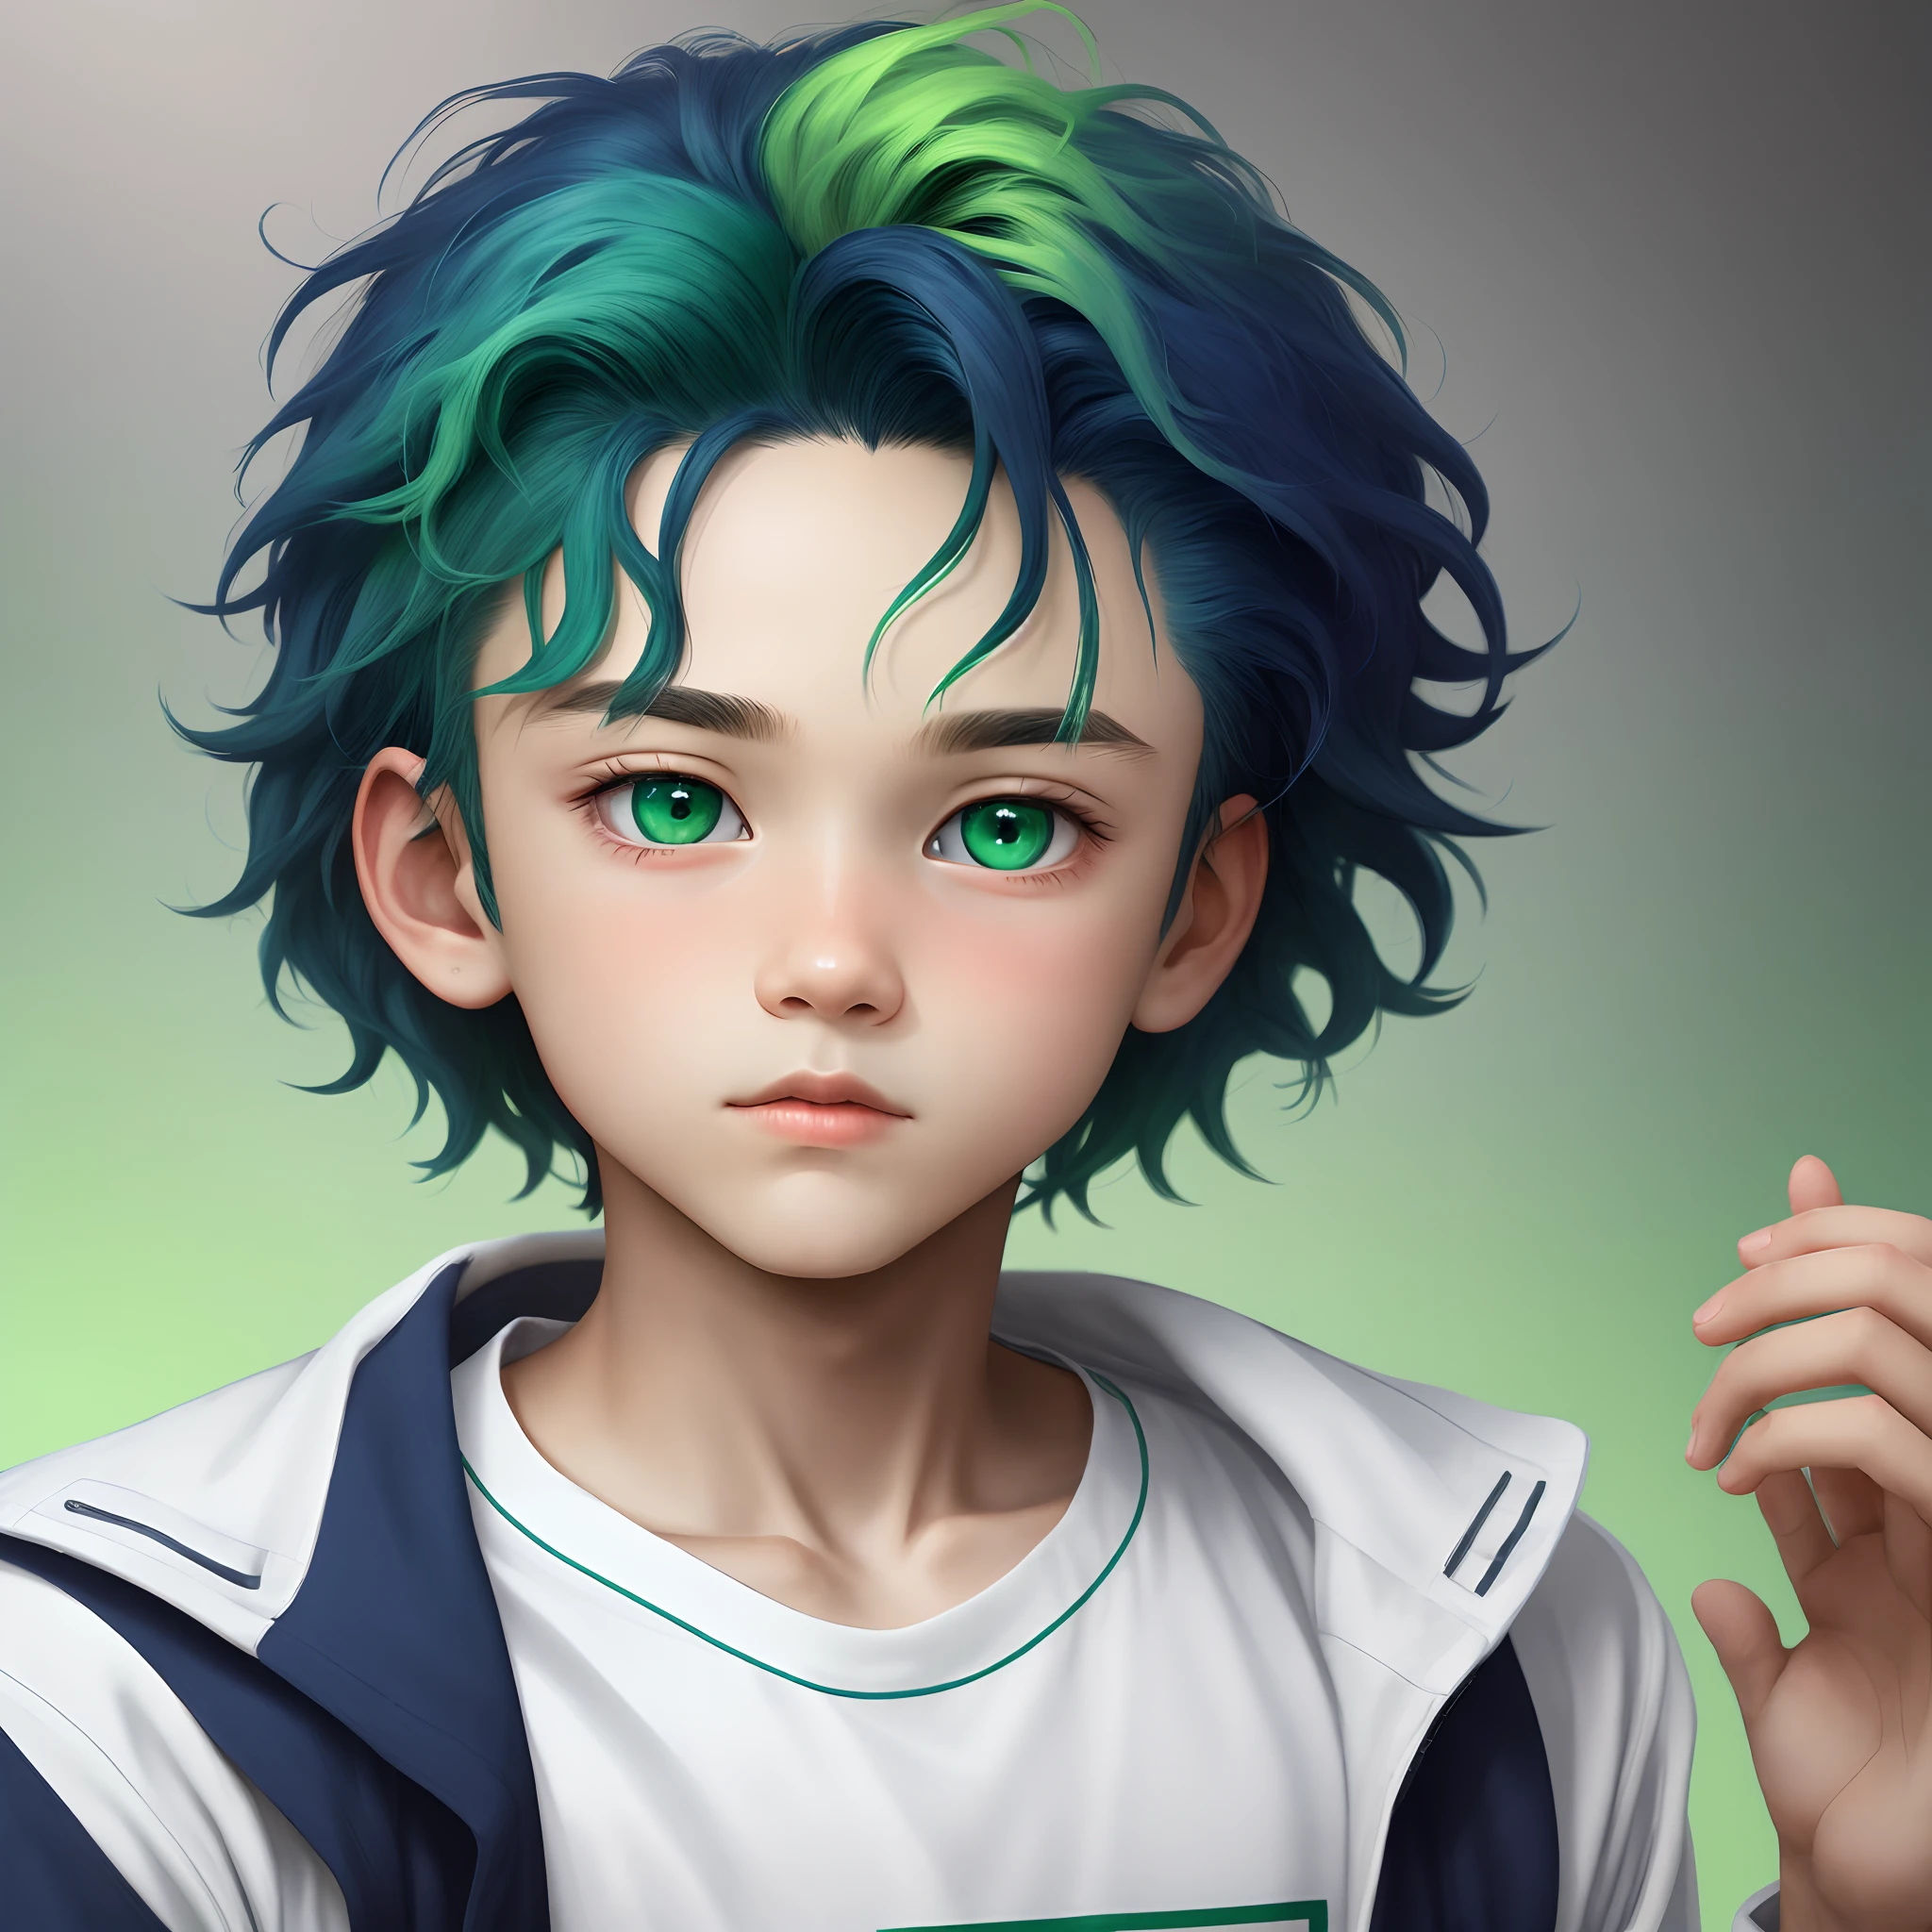 A close up of a person with a green and blue hair - SeaArt AI